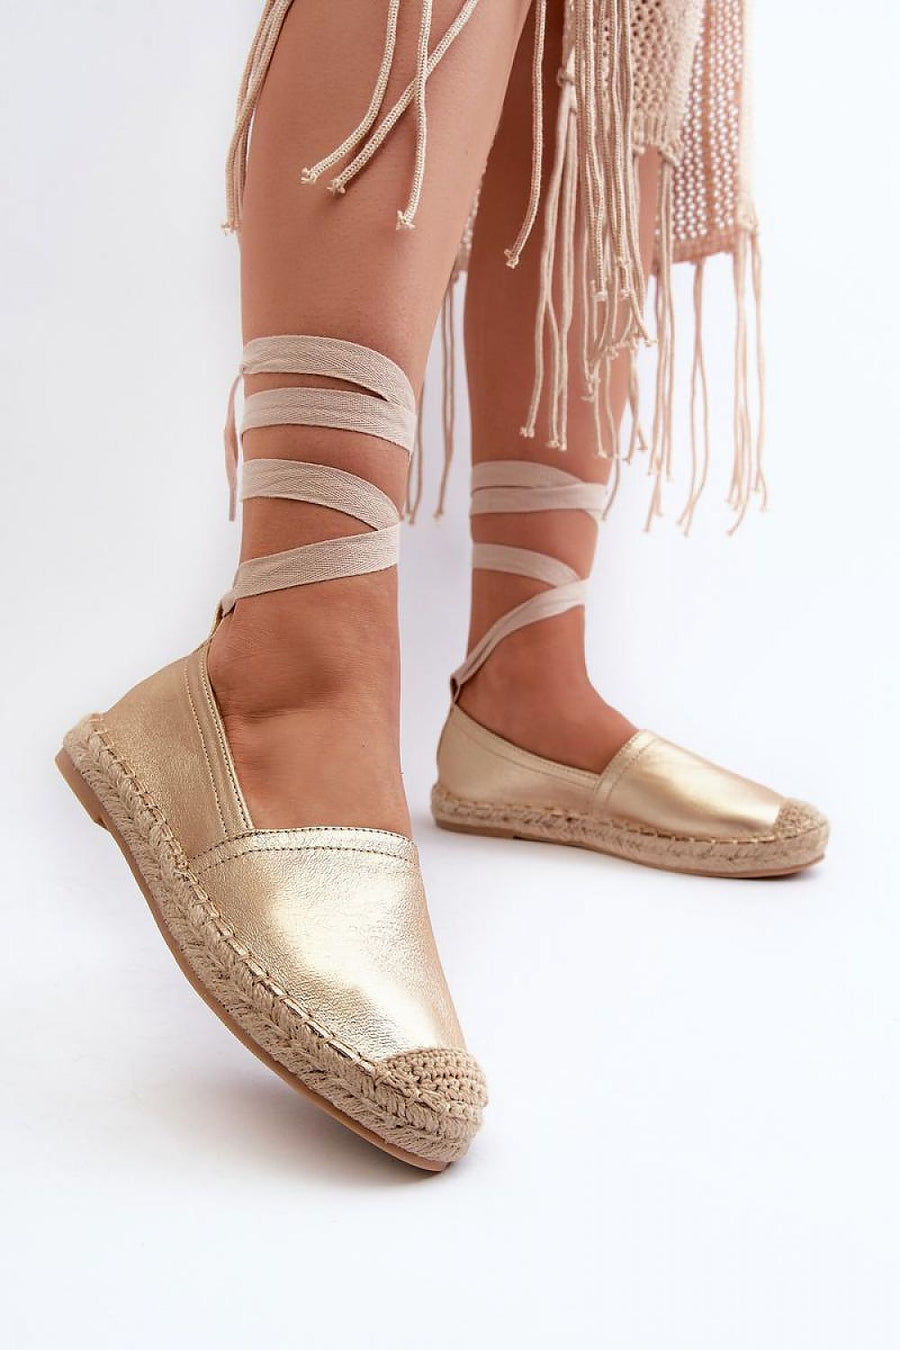 Espadrilles Model 197129 Step in style